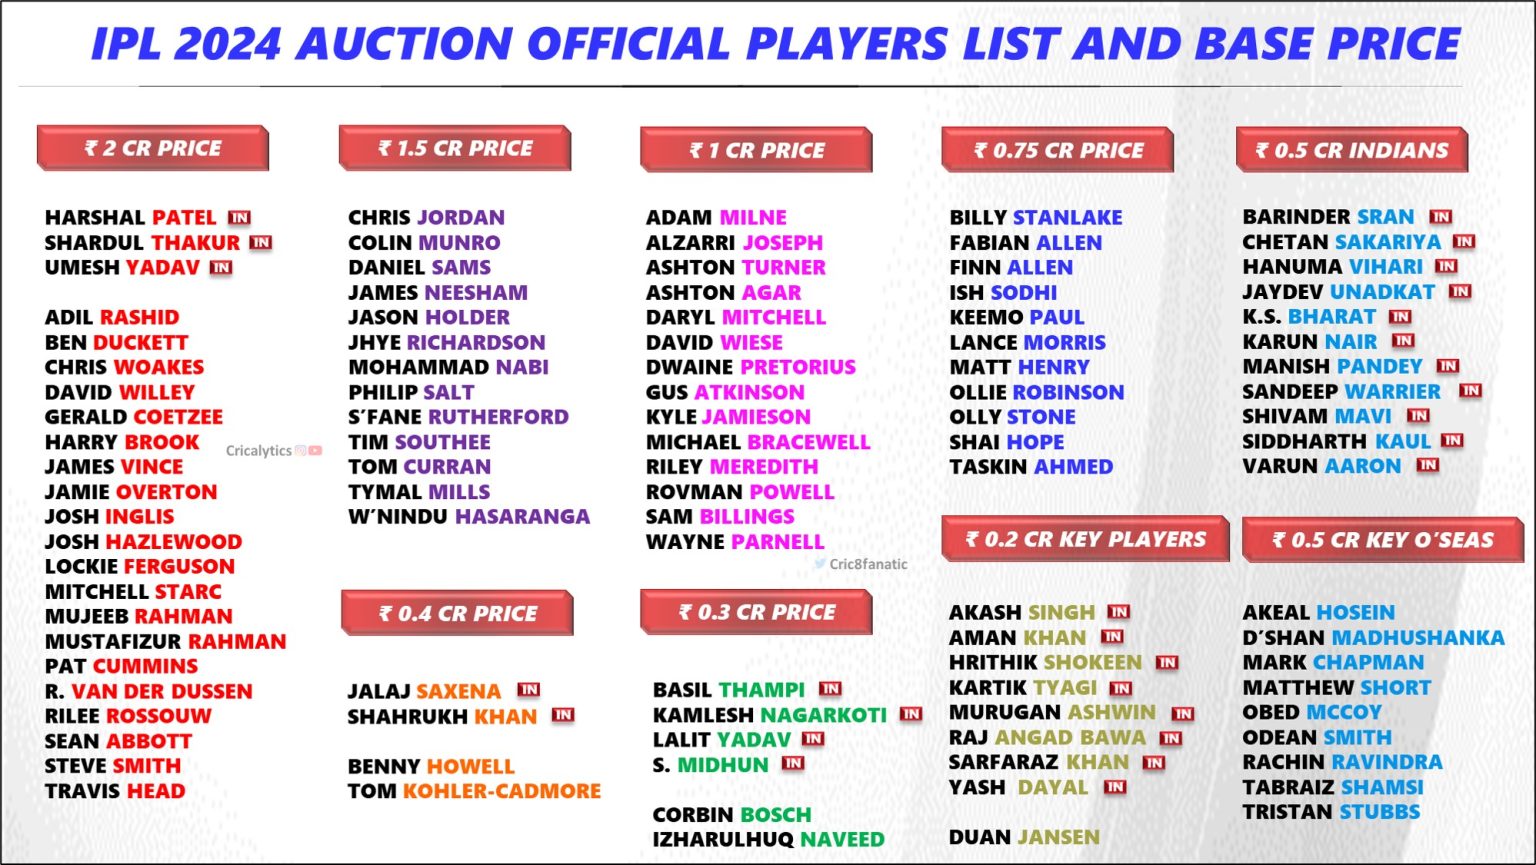 IPL 2024 Auction Complete List of Shortlisted 333 Players